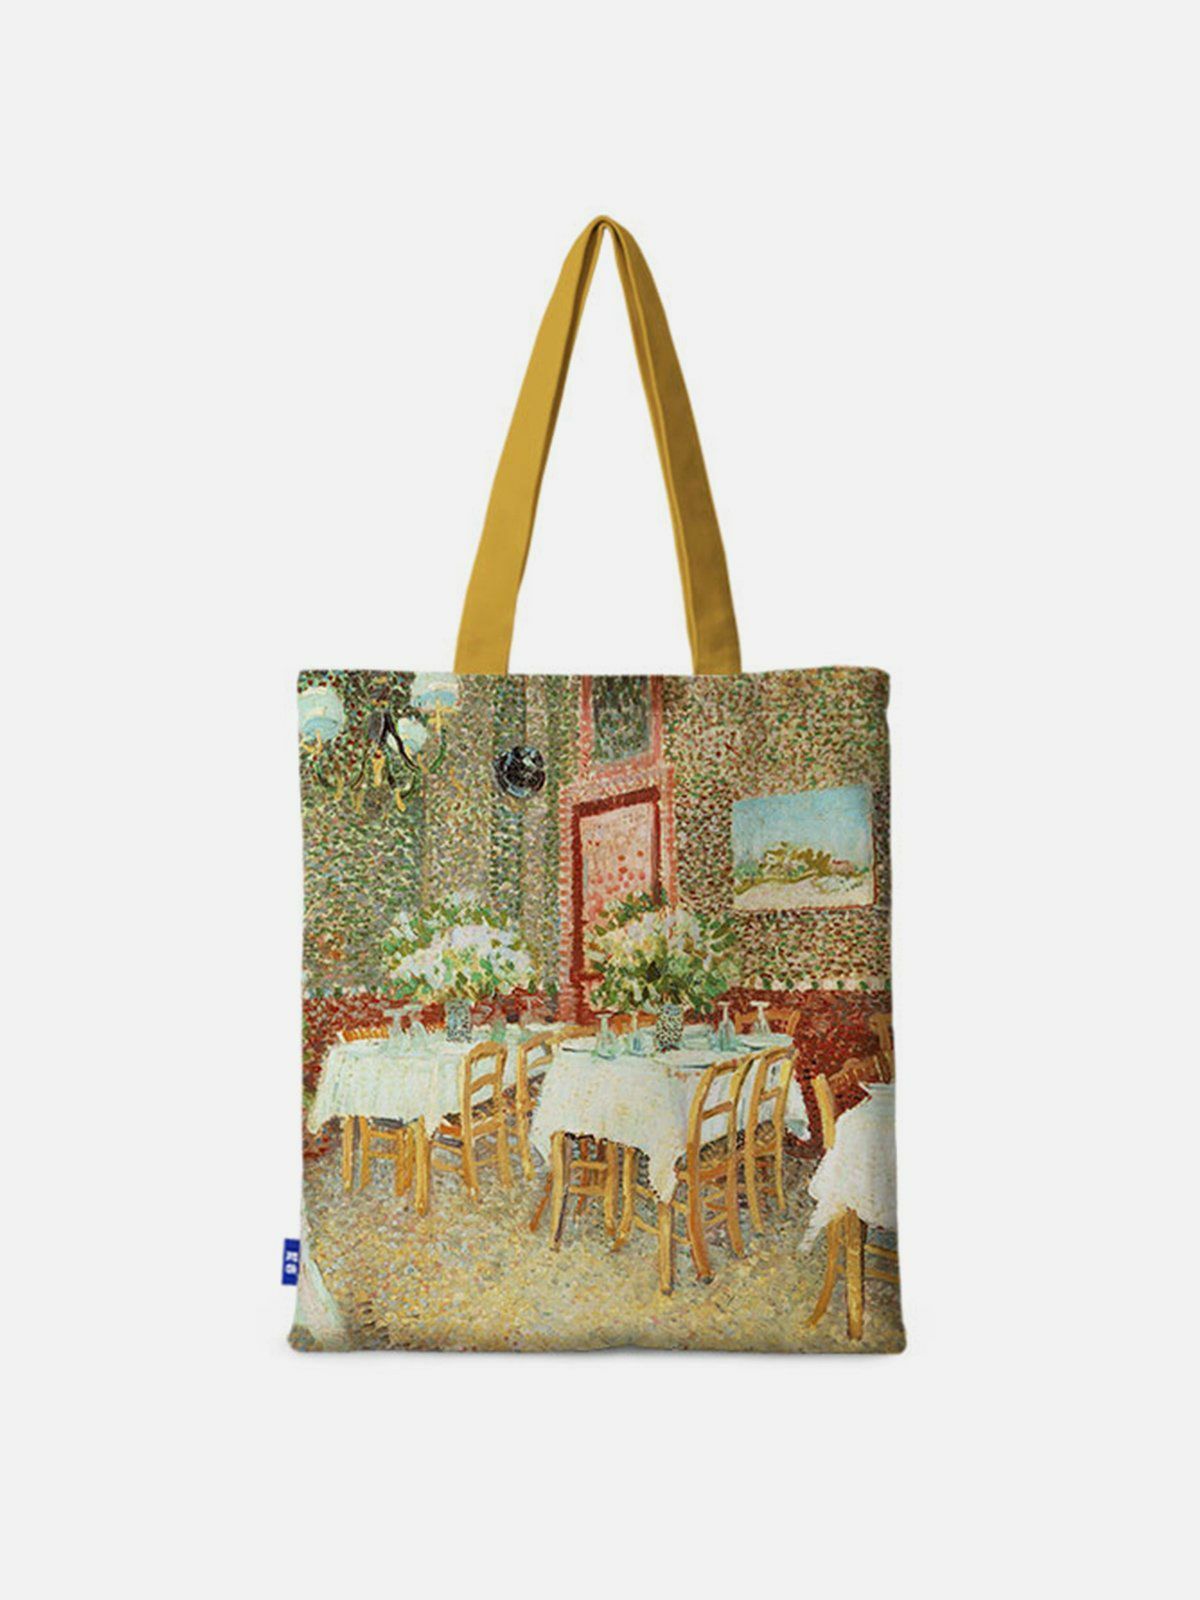 van gogh oil painting print bag artistic & quirky fashion accessory 6901